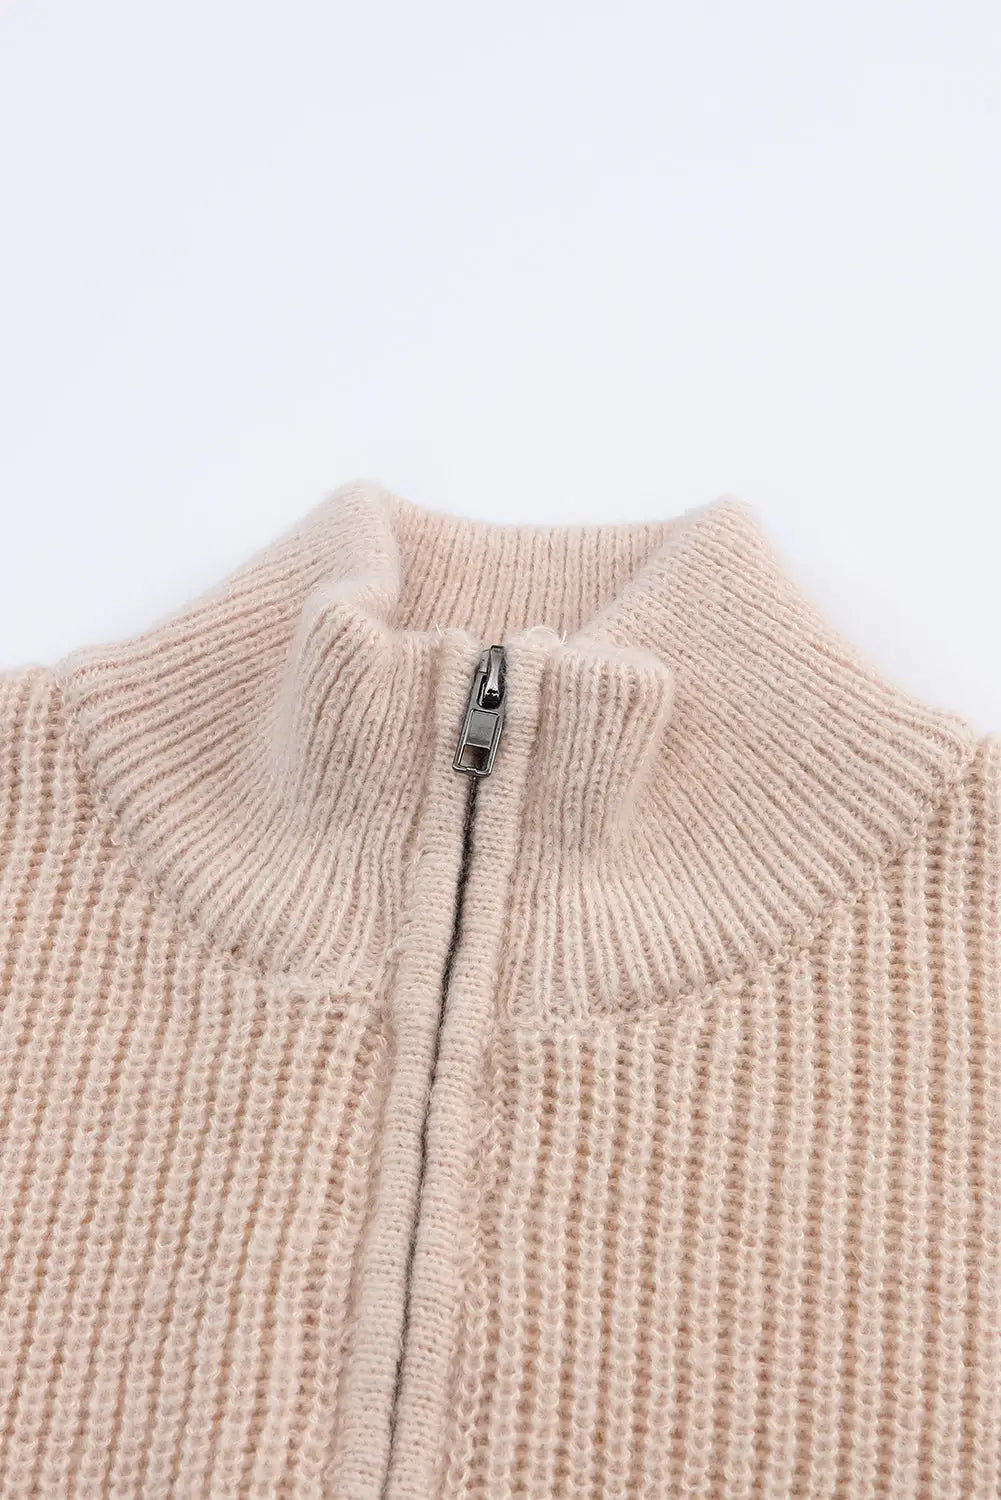 Apricot striped color block knit zip collared sweater - tops